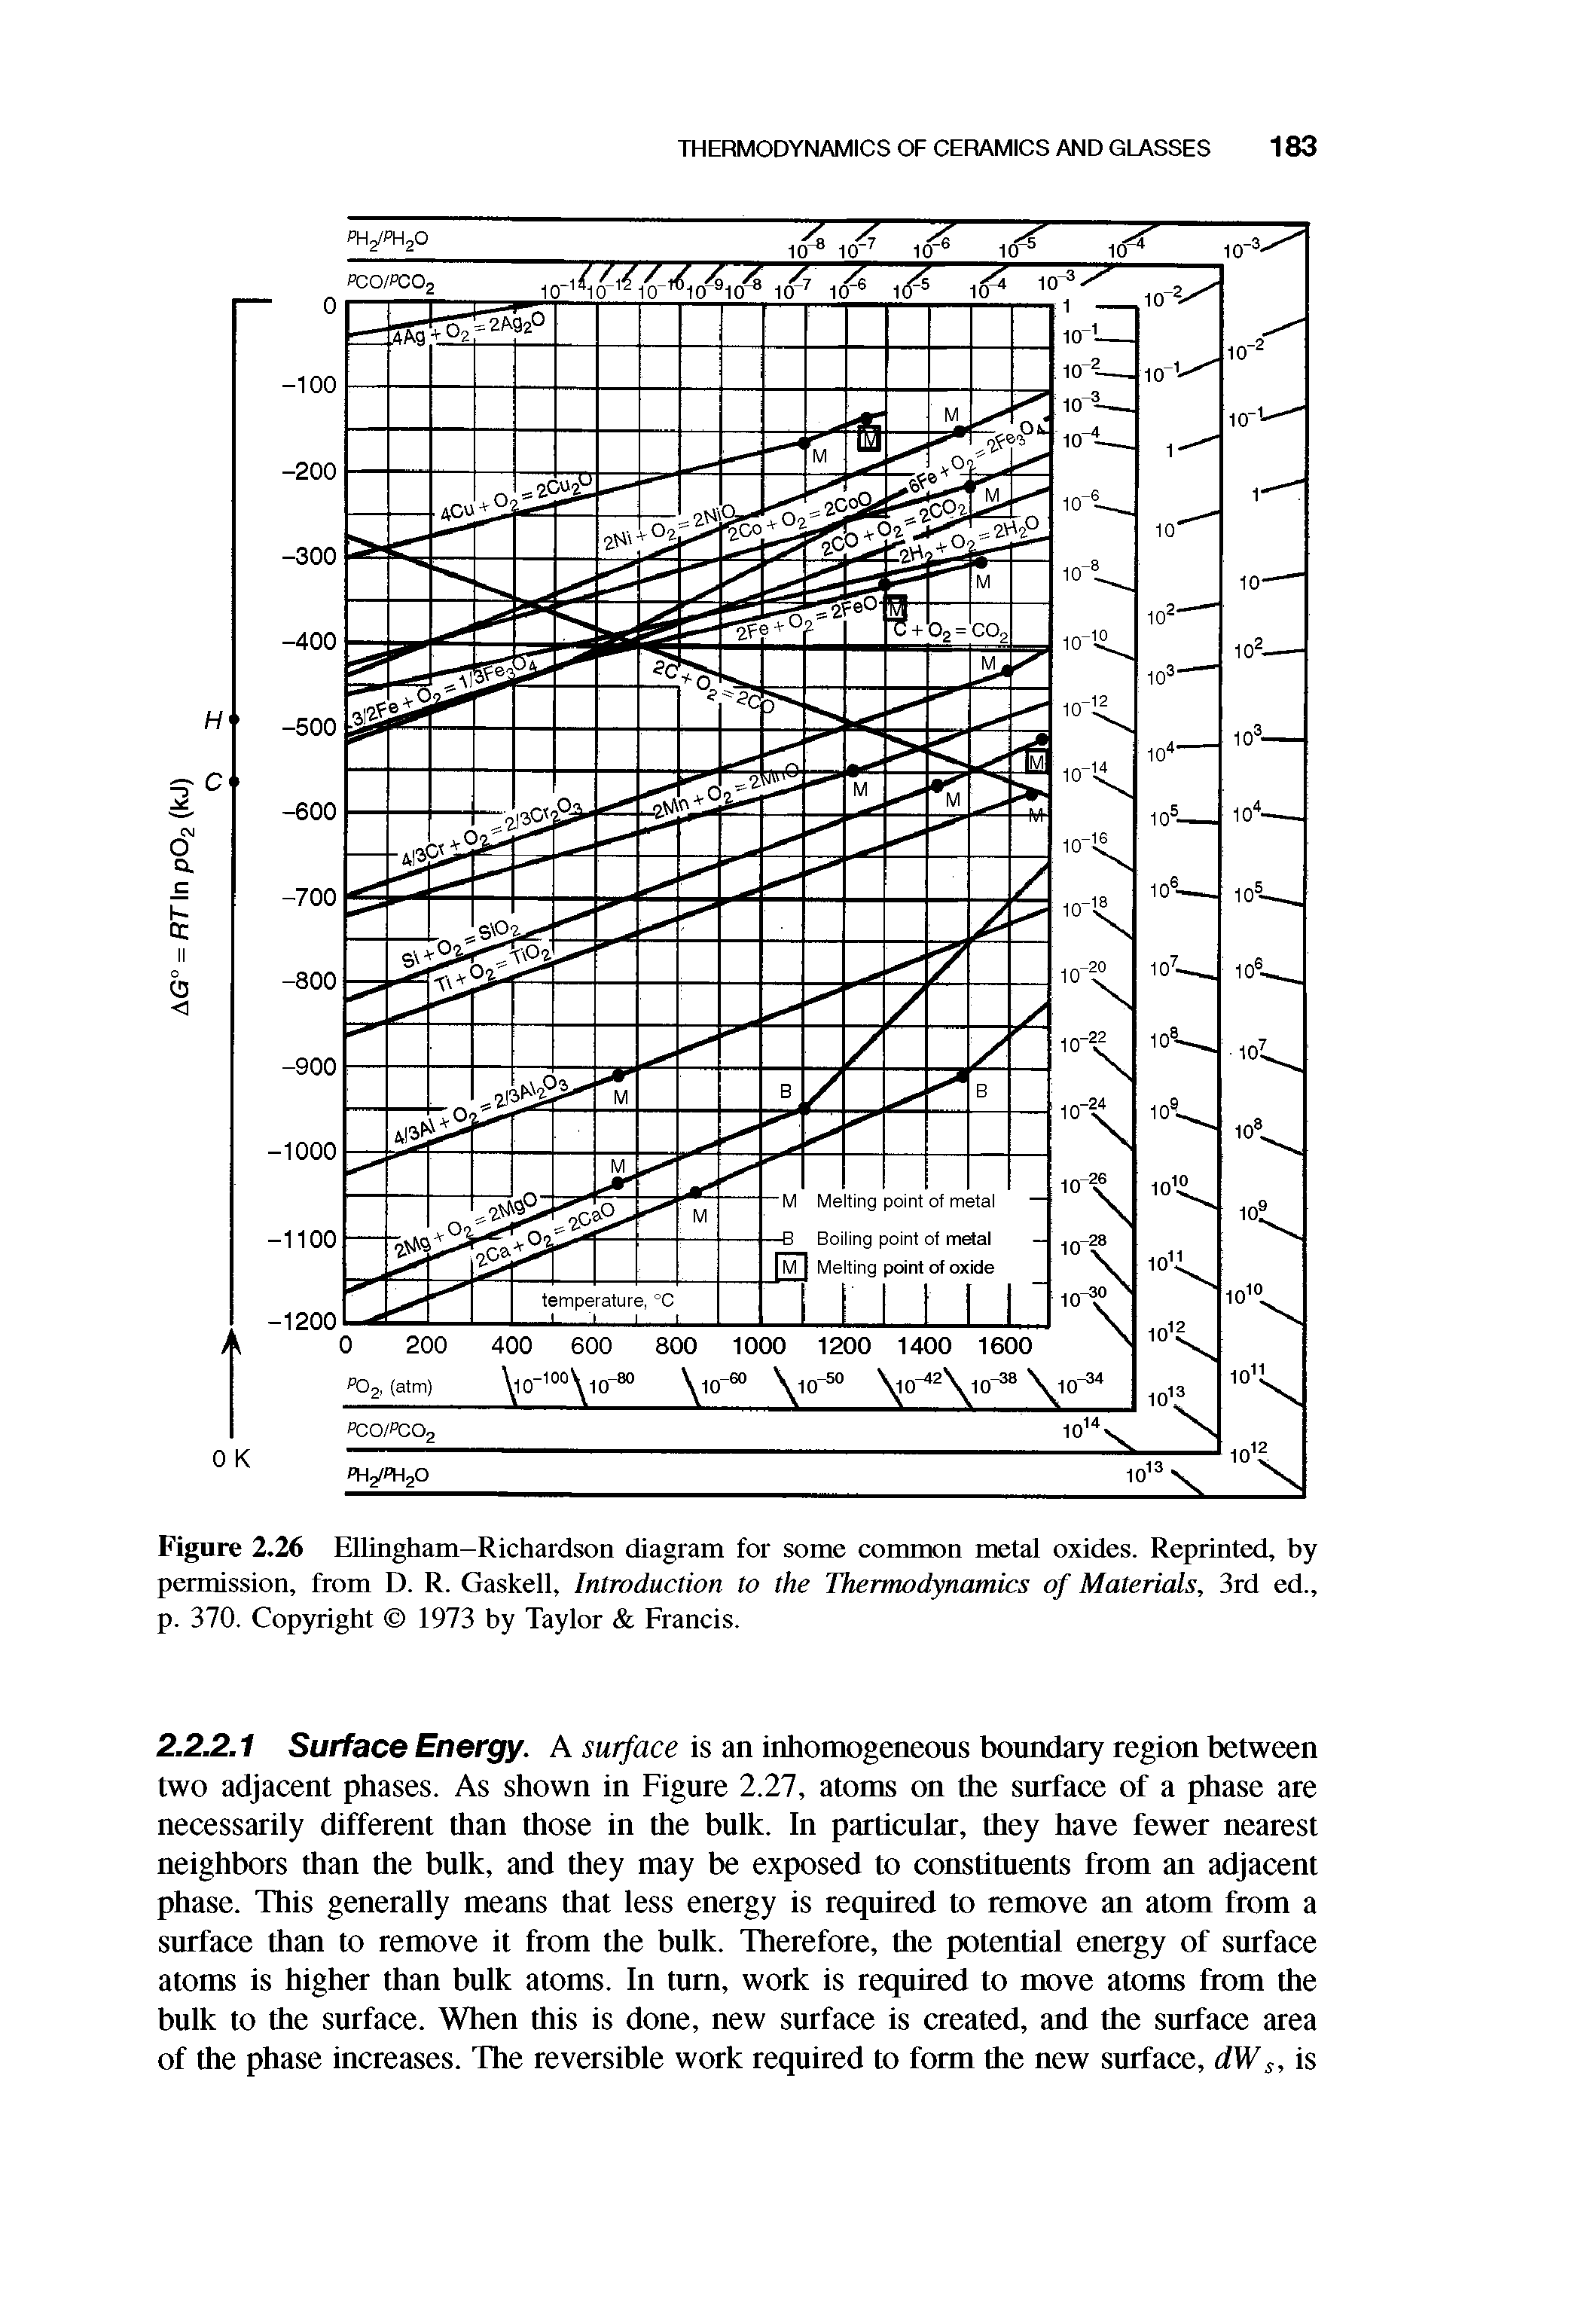 Figure 2.26 Ellingham-Richardson diagram for some common metal oxides. Reprinted, by permission, from D. R. Gaskell, Introduction to the Thermodynamics of Materials, 3rd ed., p. 370. Copyright 1973 by Taylor Francis.